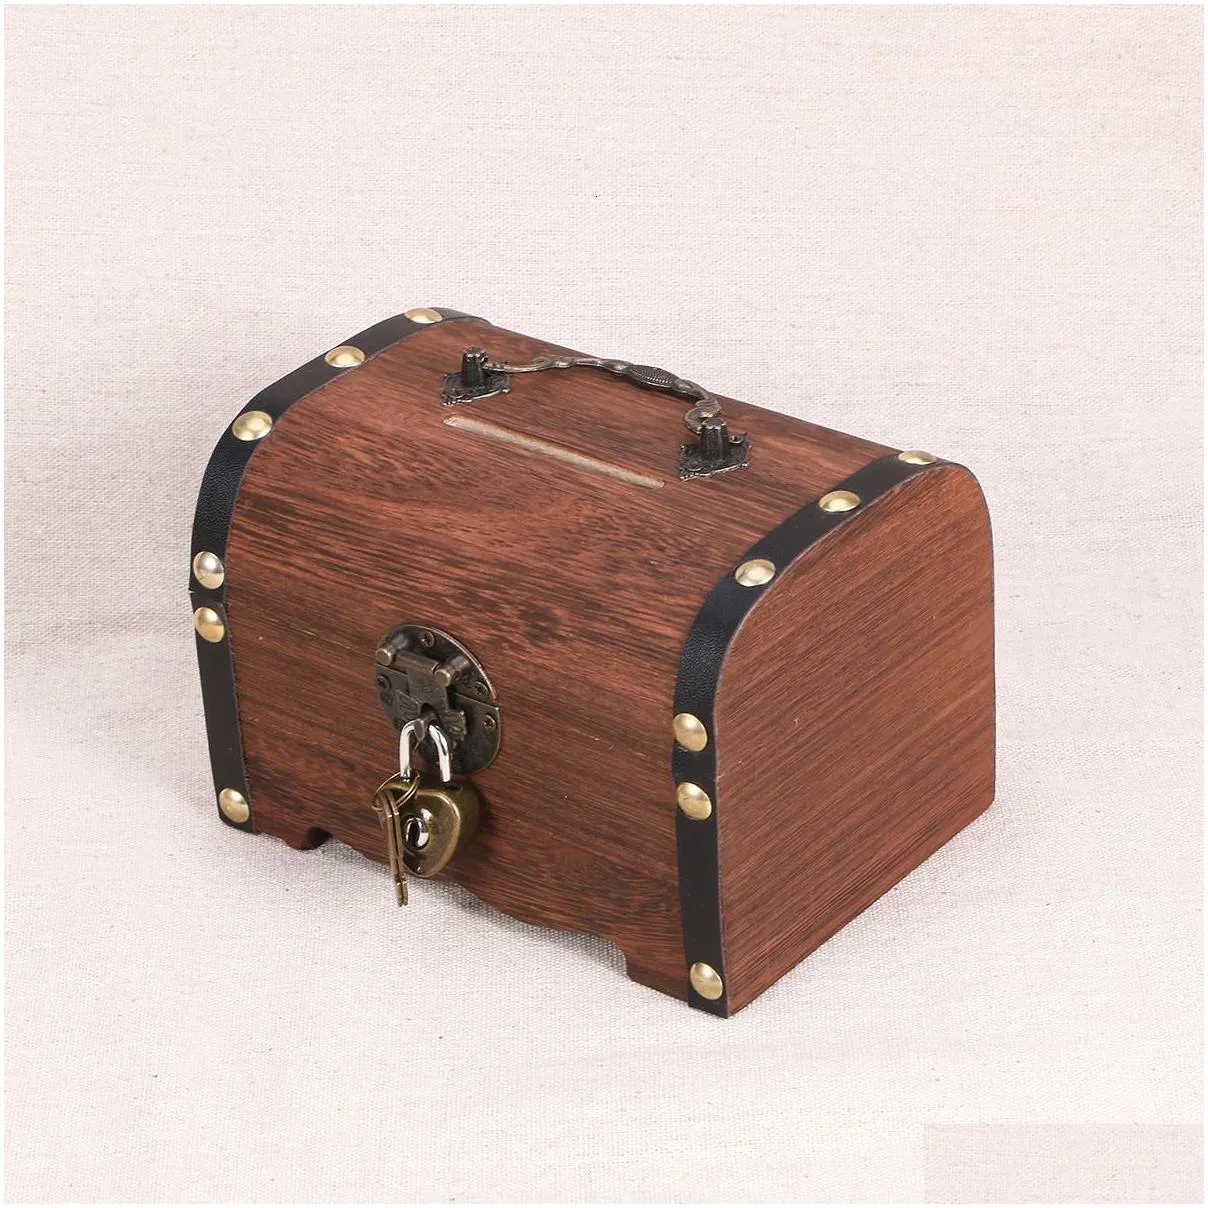 novelty items box wooden treasure bank storage chest piggy wood vintage money coin lock boxes jewelry saving pirate organizer decorative gift